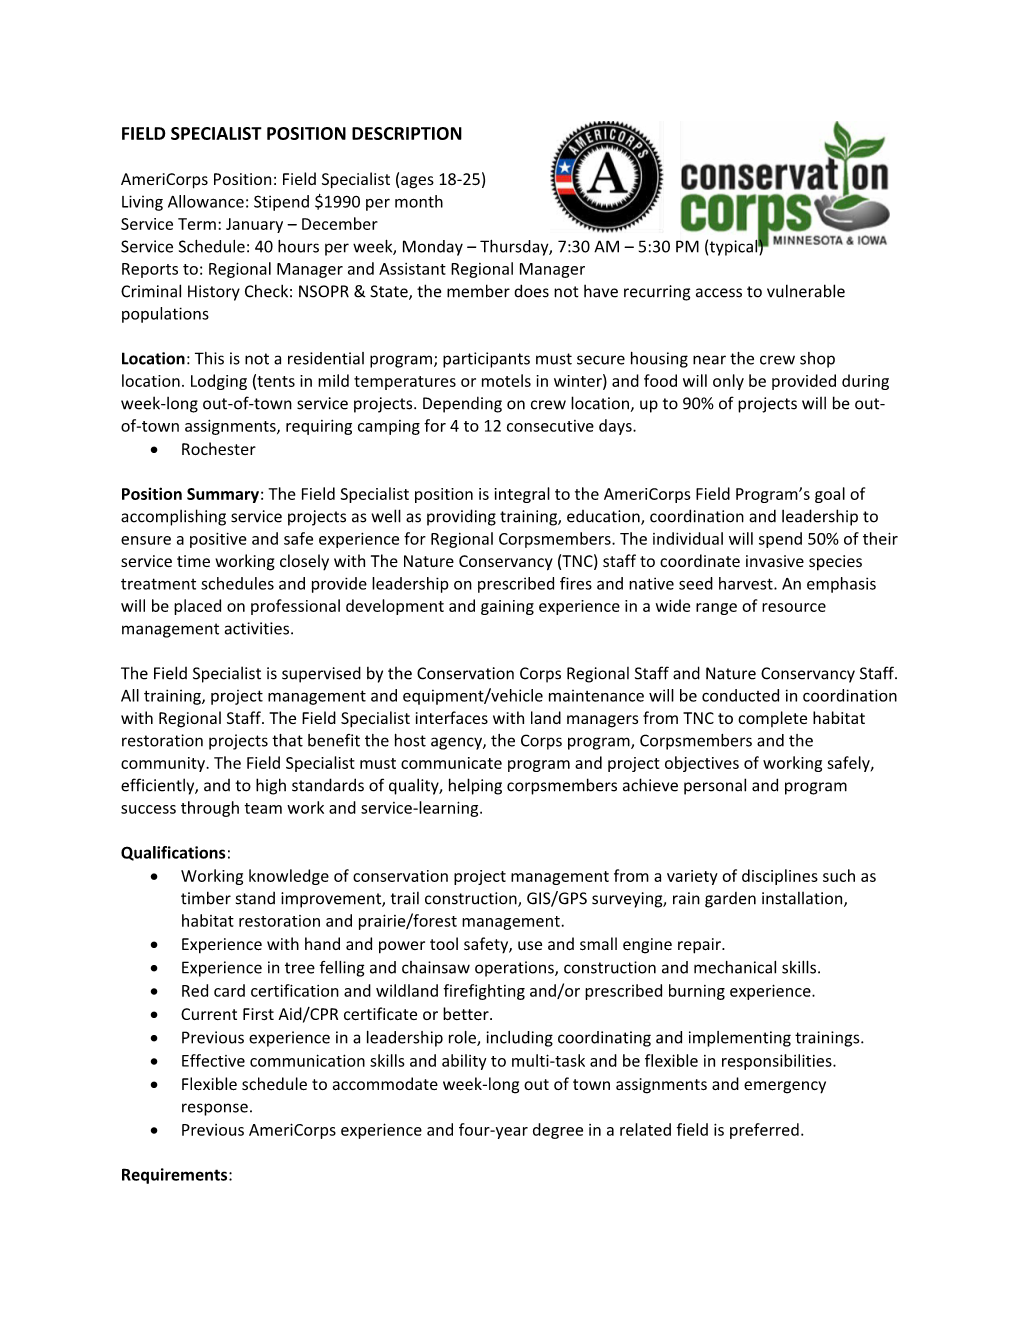 Americorps Position: Field Specialist (Ages 18-25)